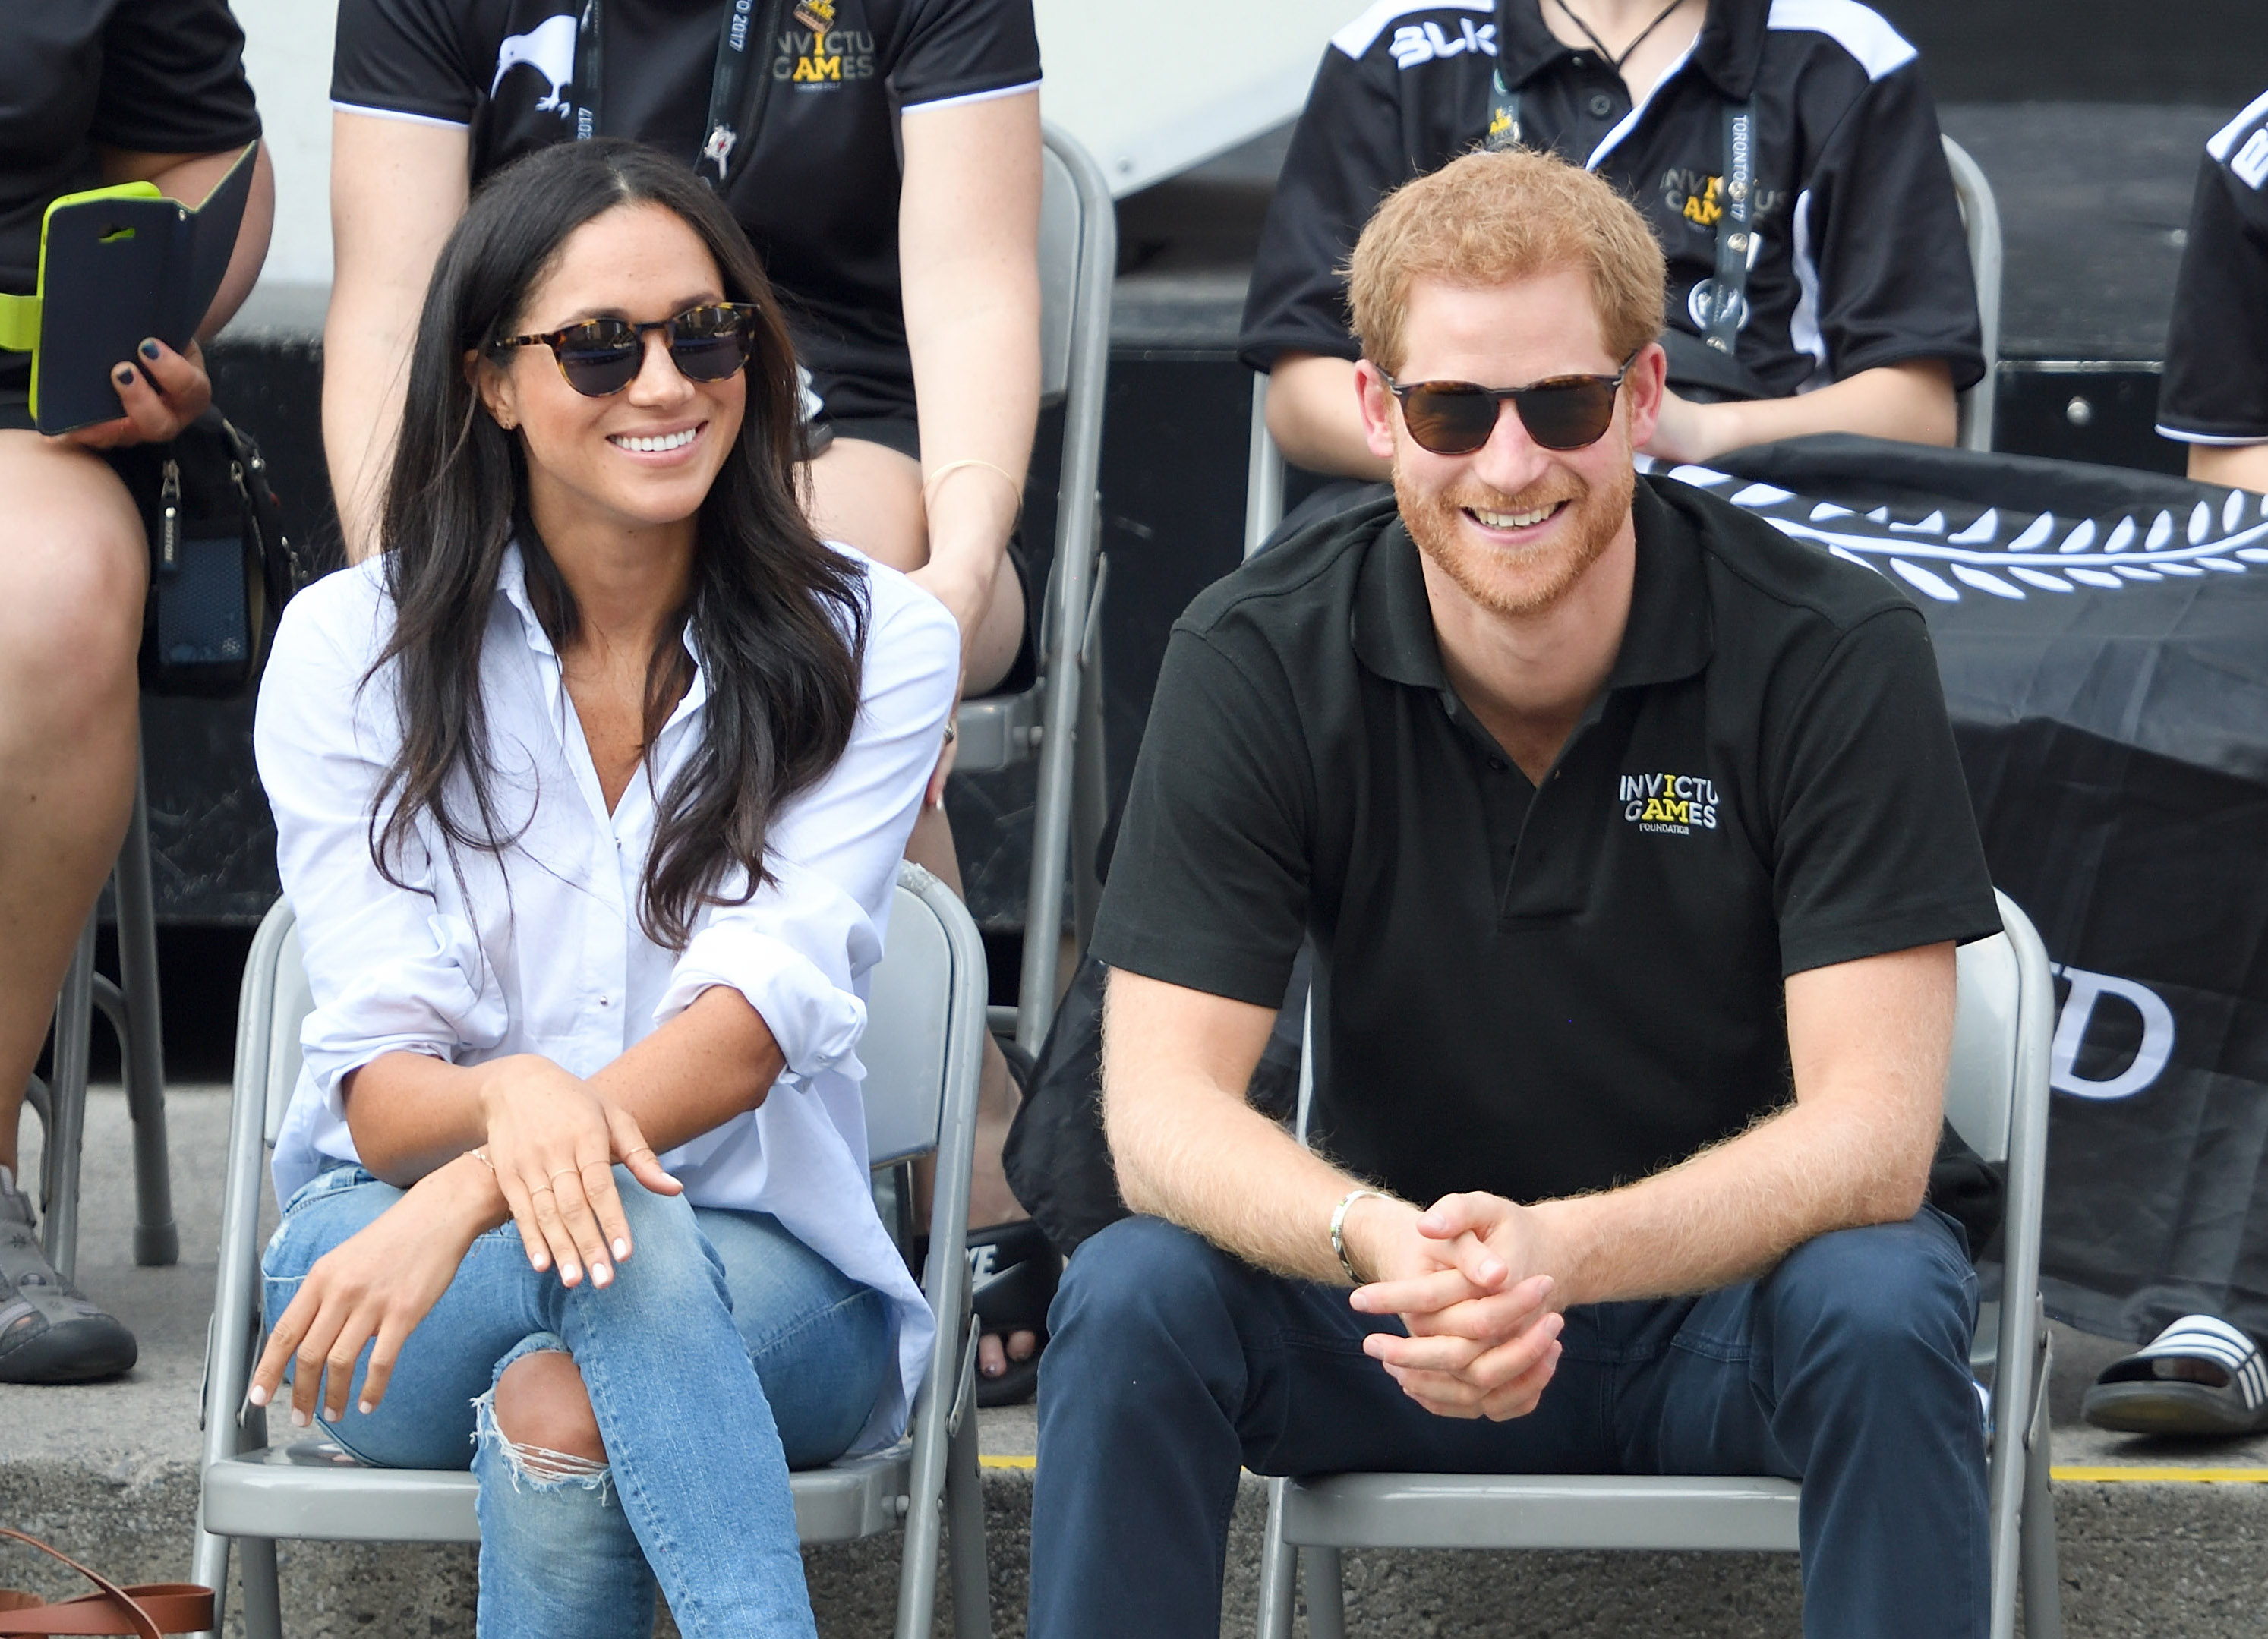 Meghan Markle and Prince Harry attend day 3 of 2017 Invictus Games in Toronto